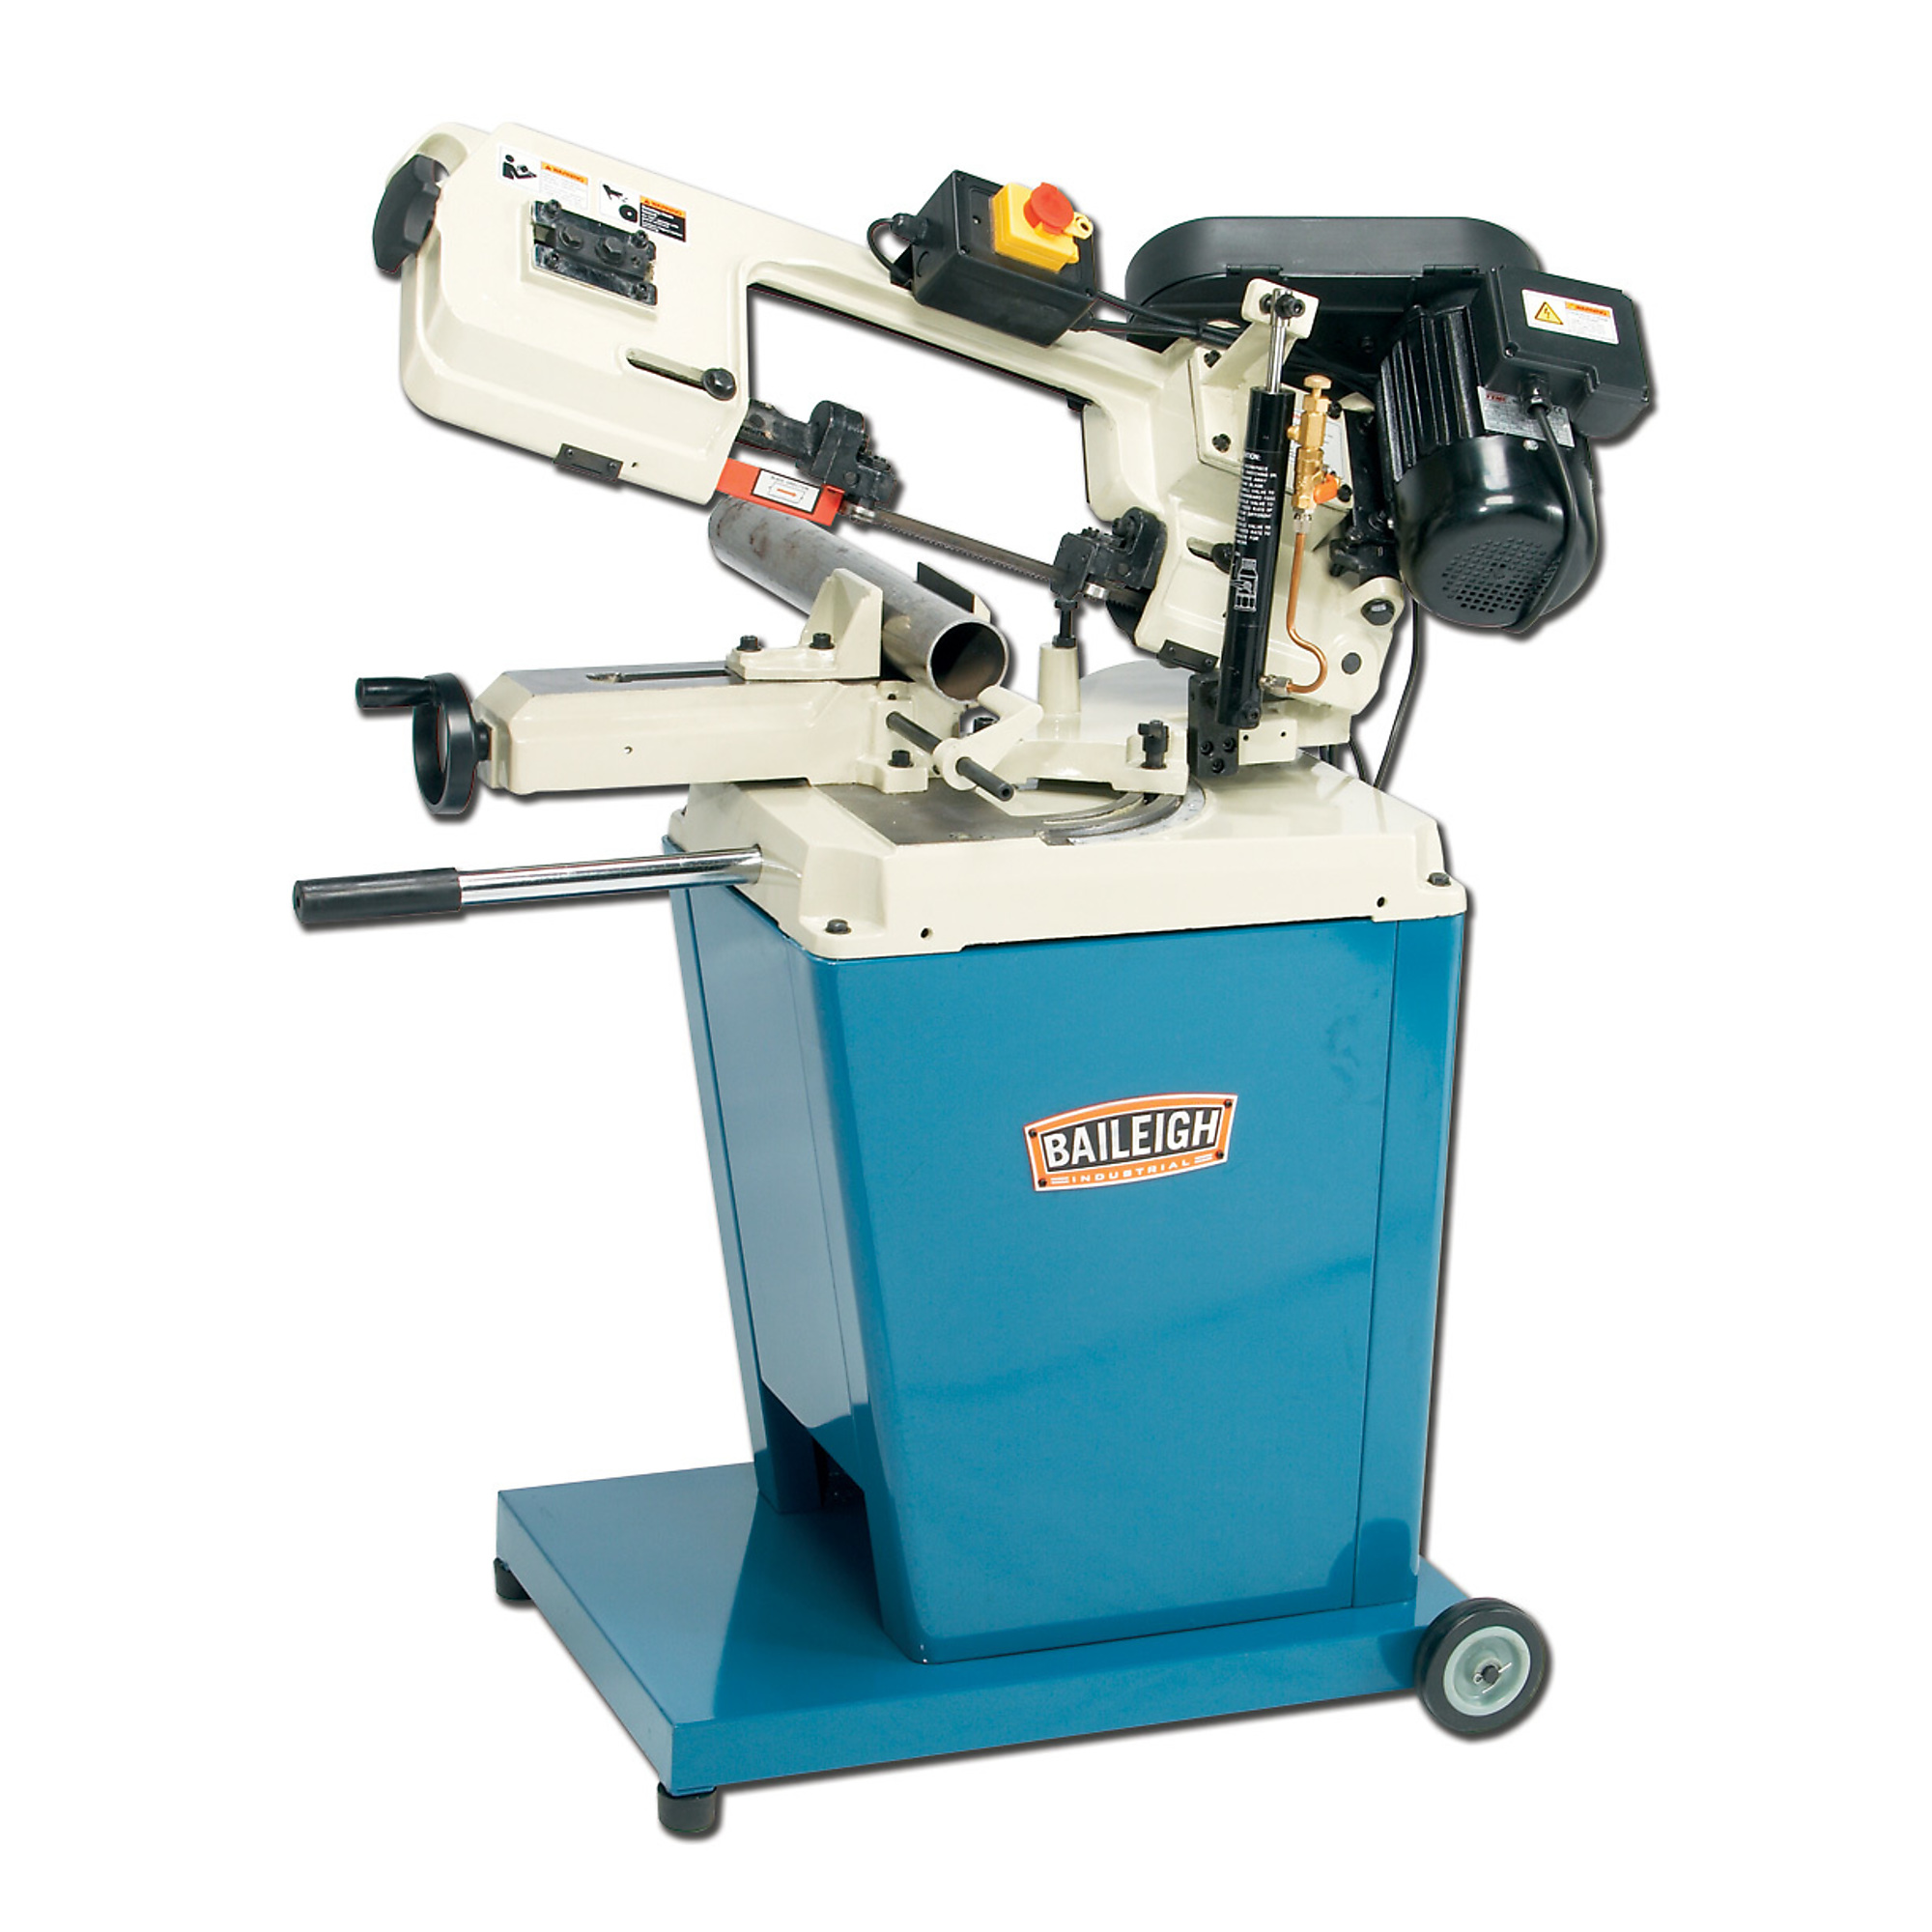 Baileigh, Metal Cutting Saw Vertical Cutting Option, Horsepower 0.75 HP, Volts 110 Power Type Corded, Model BS-128M